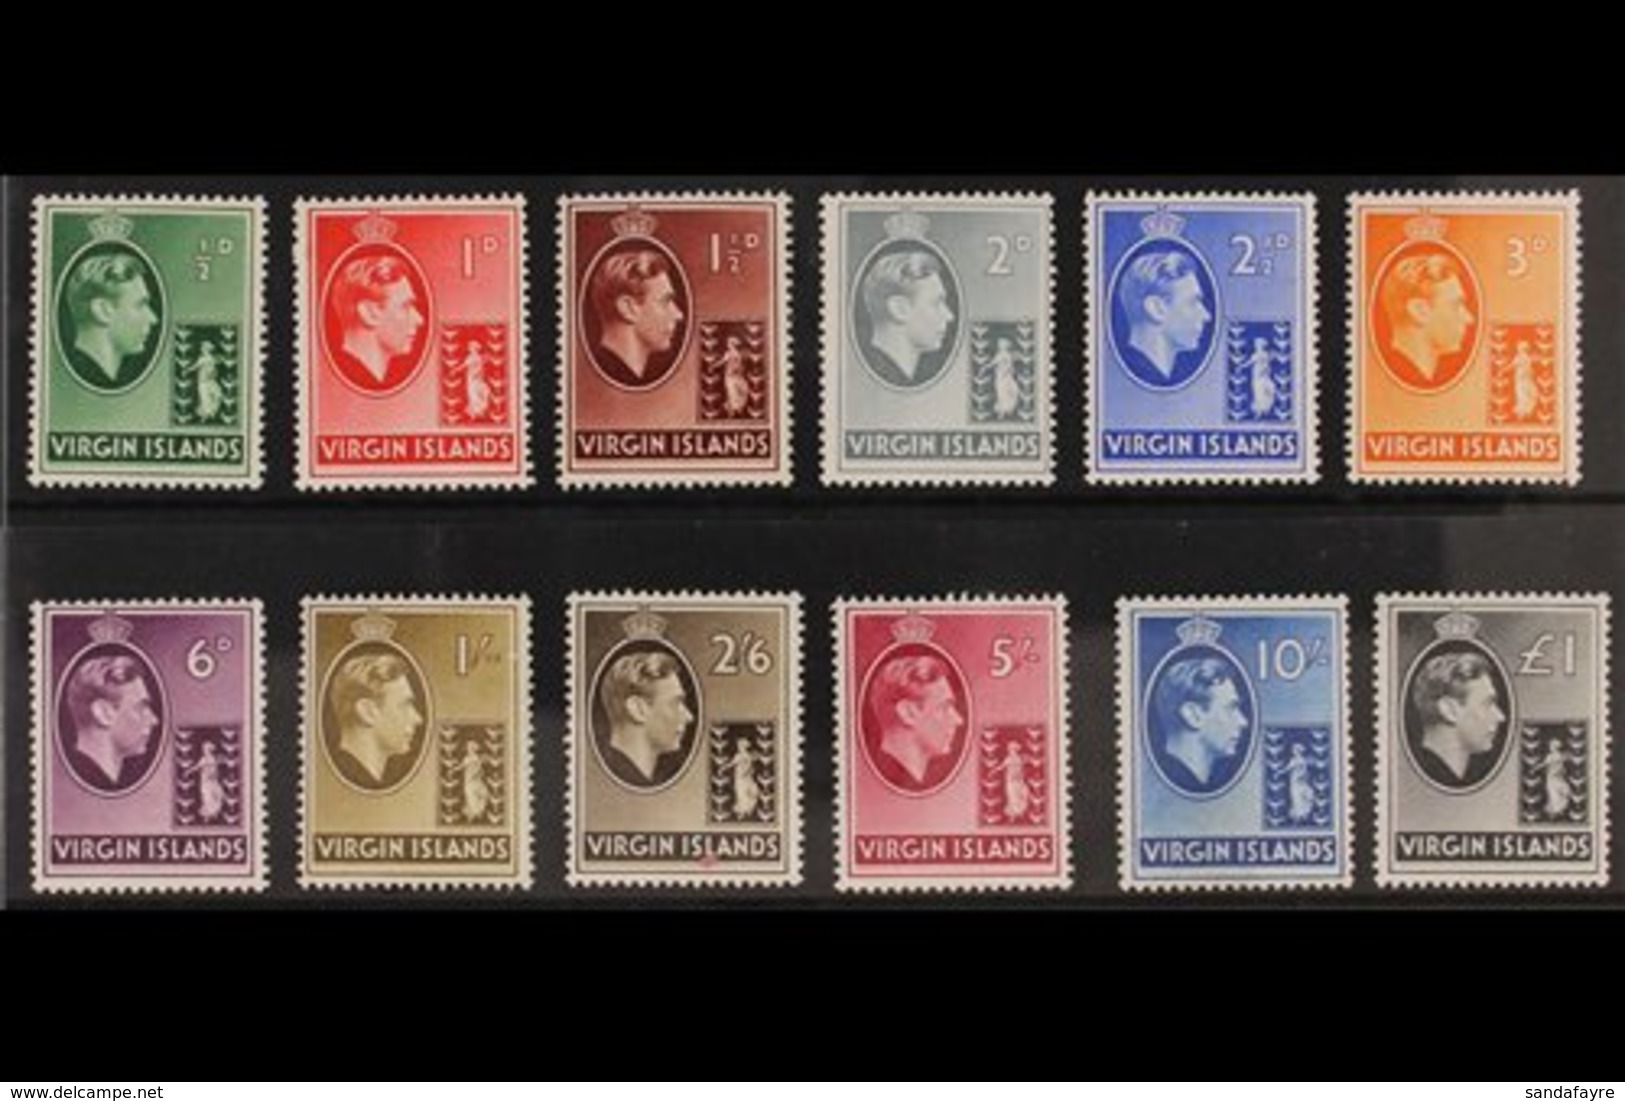 1938-47 CHALK PAPERS KGVI Definitive Complete Set, SG 110/21, Very Lightly Hinged Mint With Vibrant Colours. (12 Stamps) - Iles Vièrges Britanniques